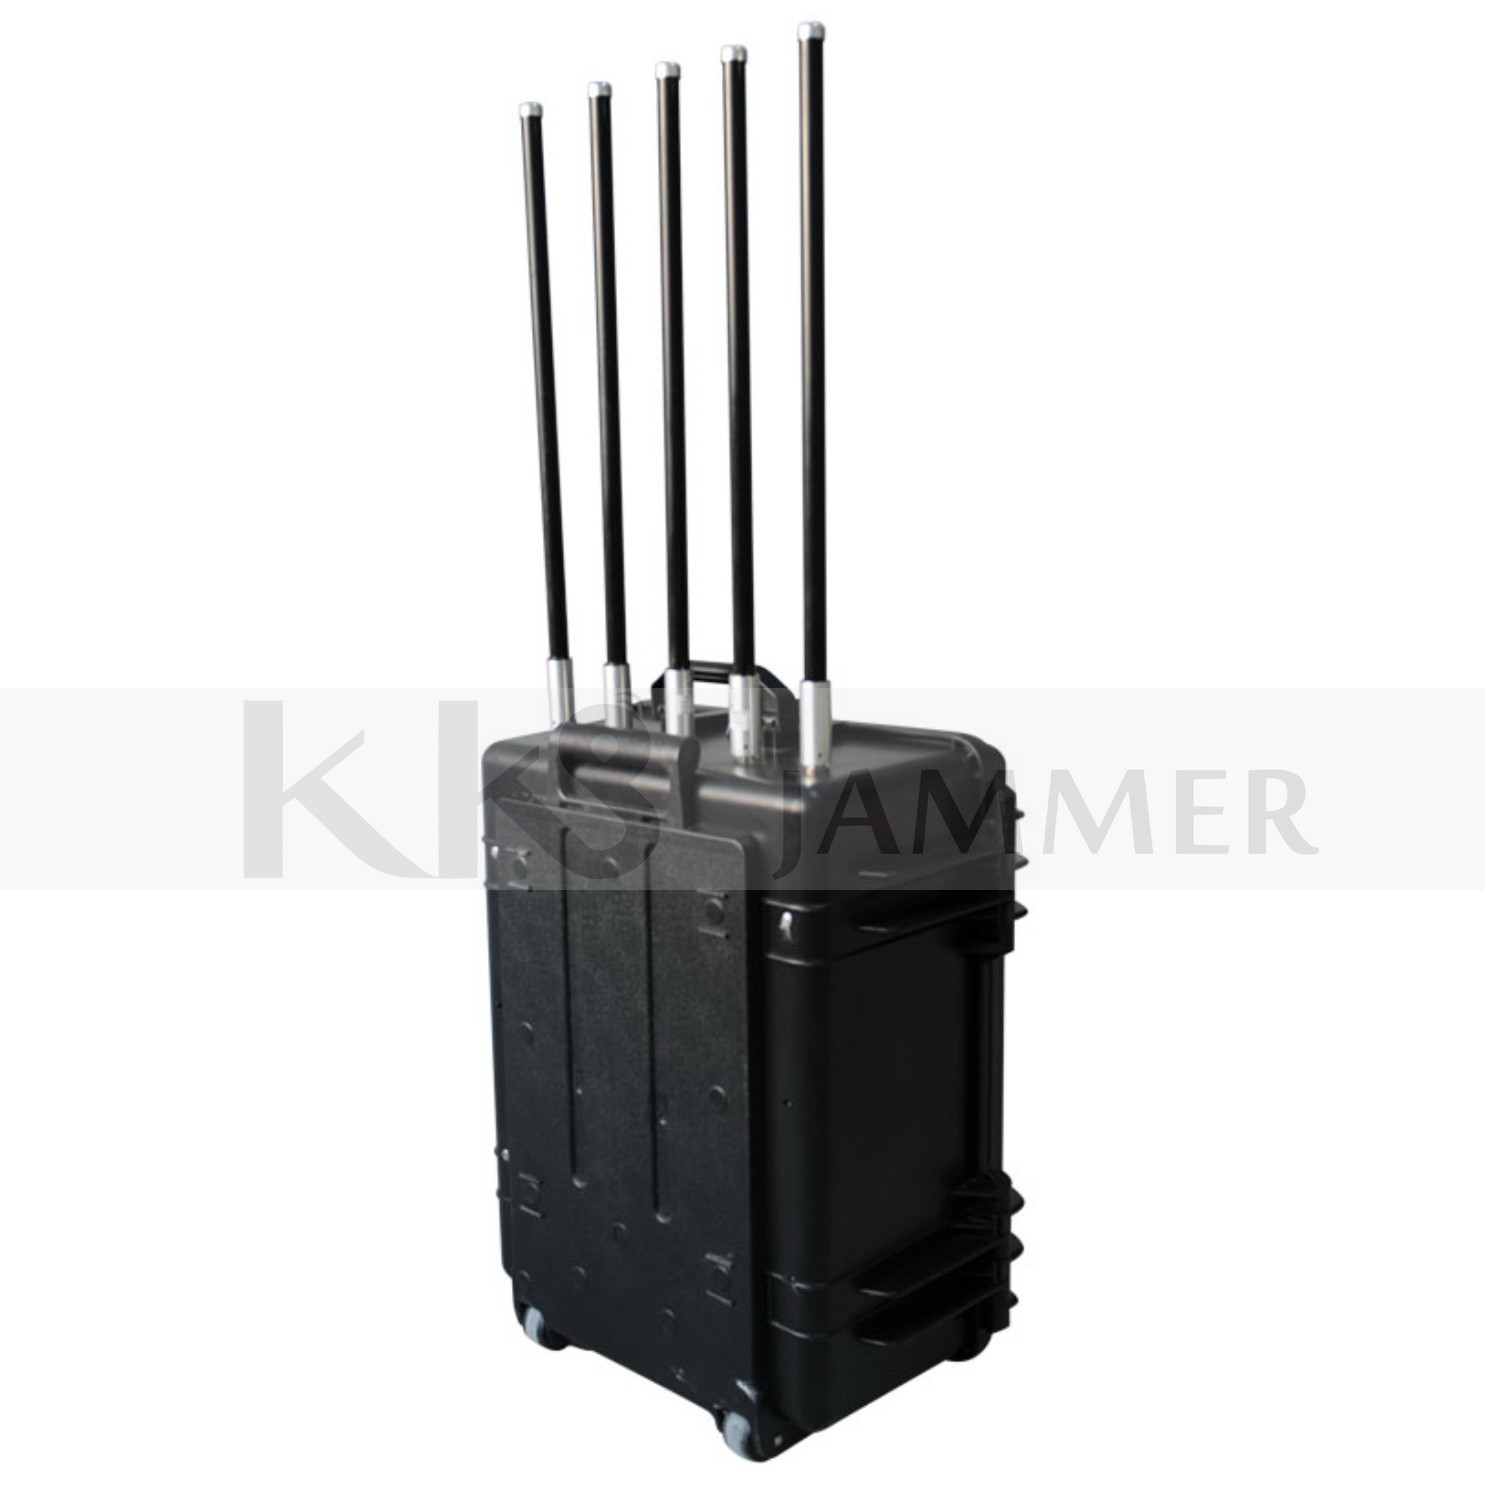 250W High Power Portable Bomb Jammer